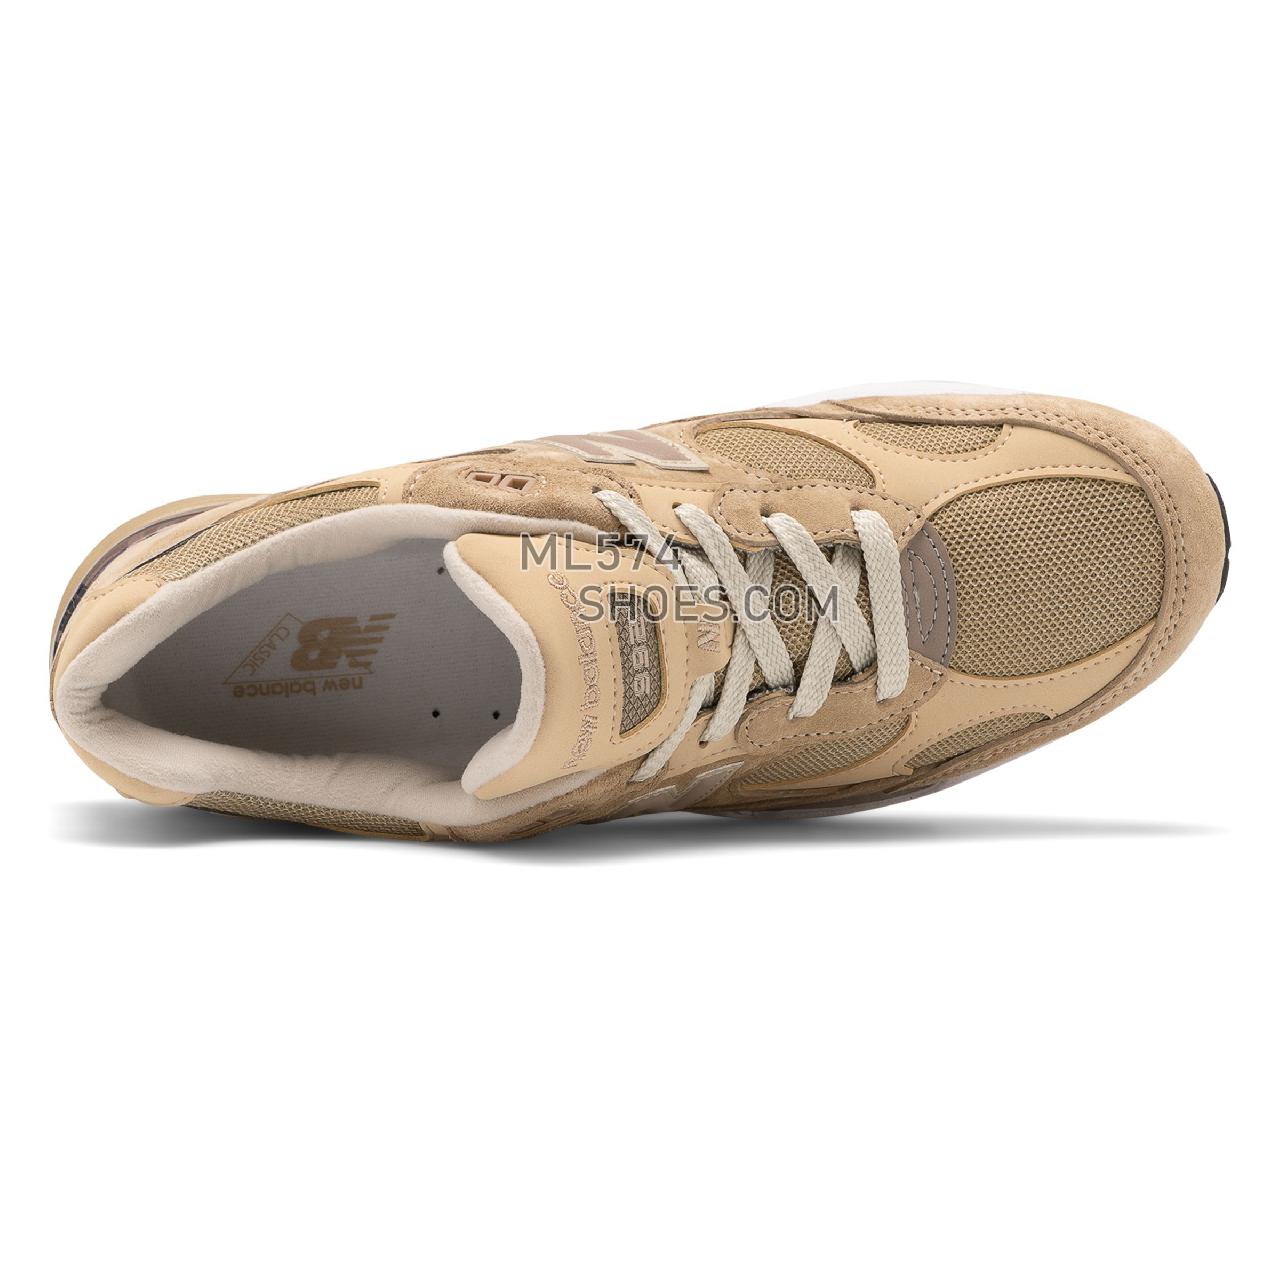 New Balance Made in US 992 - Men's Made in US 992 Classic - Tan with White - M992TN